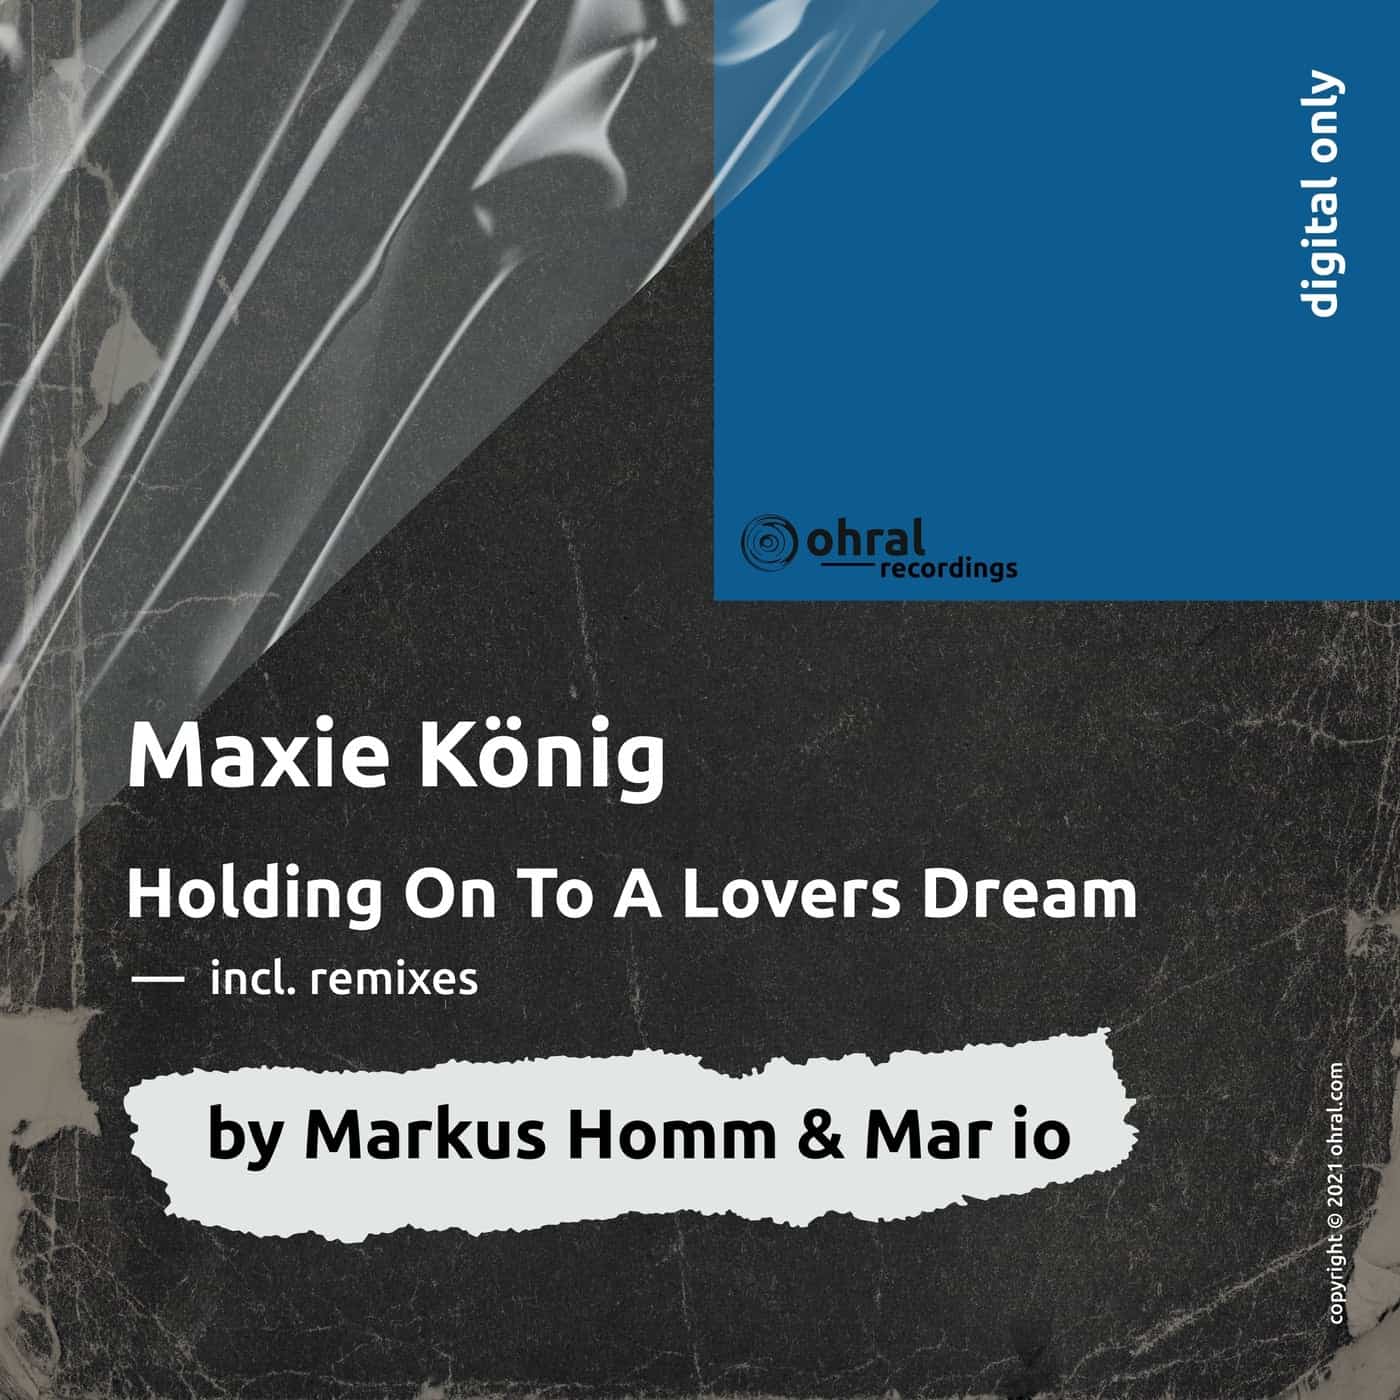 Download Holding On EP (incl. Remixes by Markus Homm & Mar io) on Electrobuzz